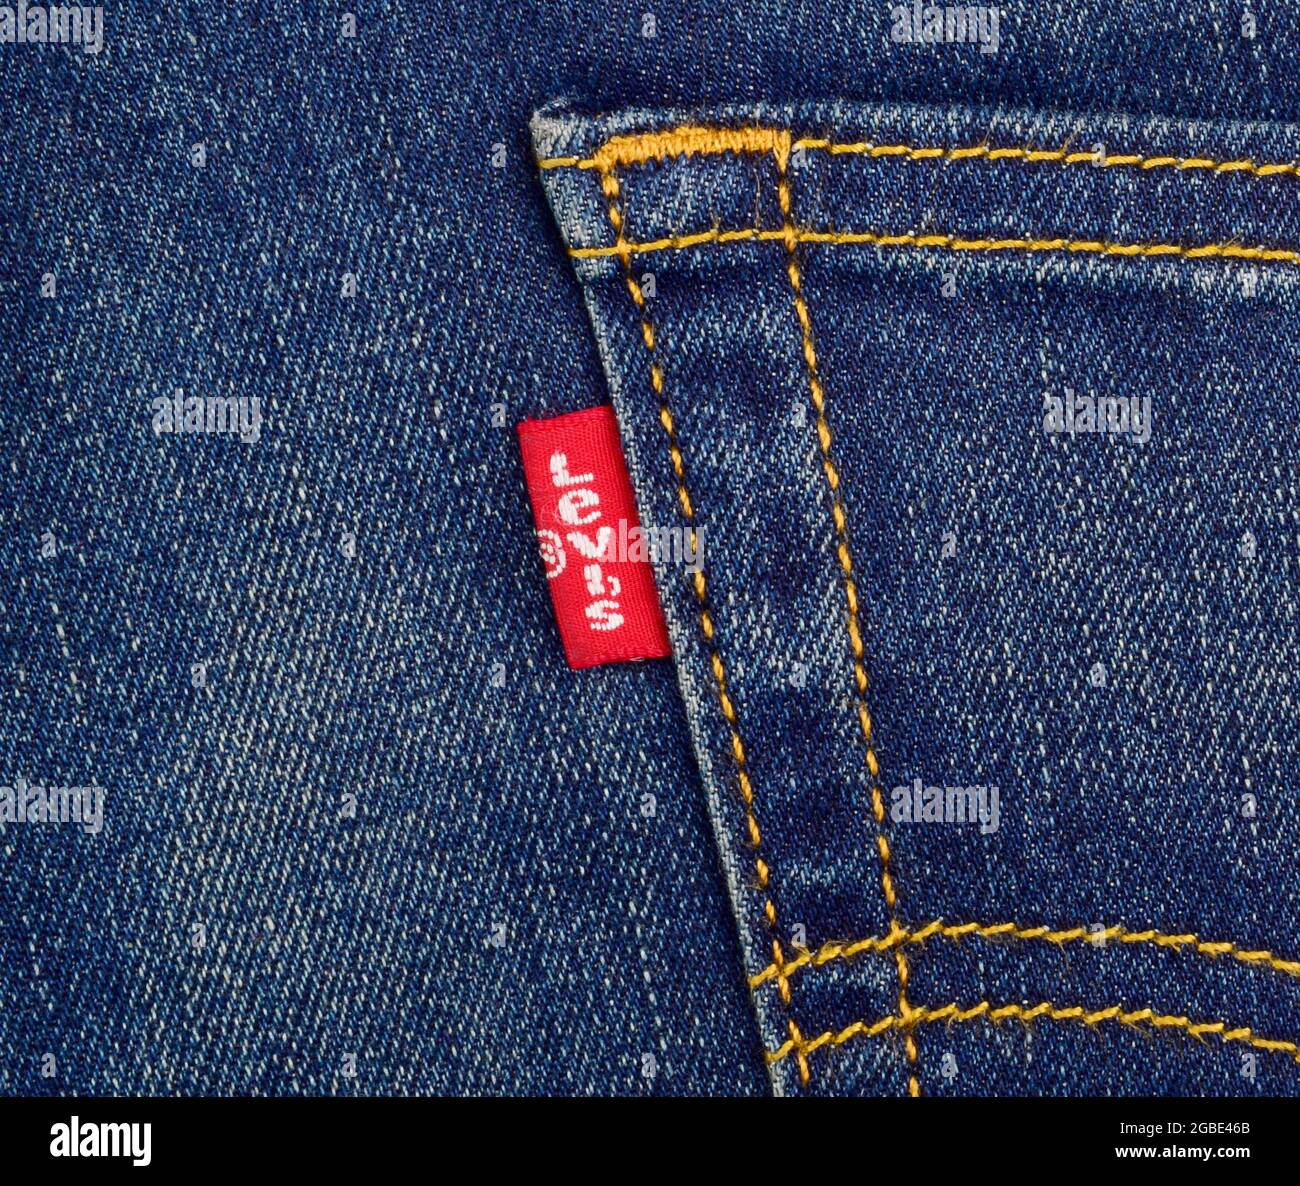 India, New Delhi, 15 Oct 2018: Close up of the LEVI'S red label on the back  pocket of denim jeans Stock Photo - Alamy